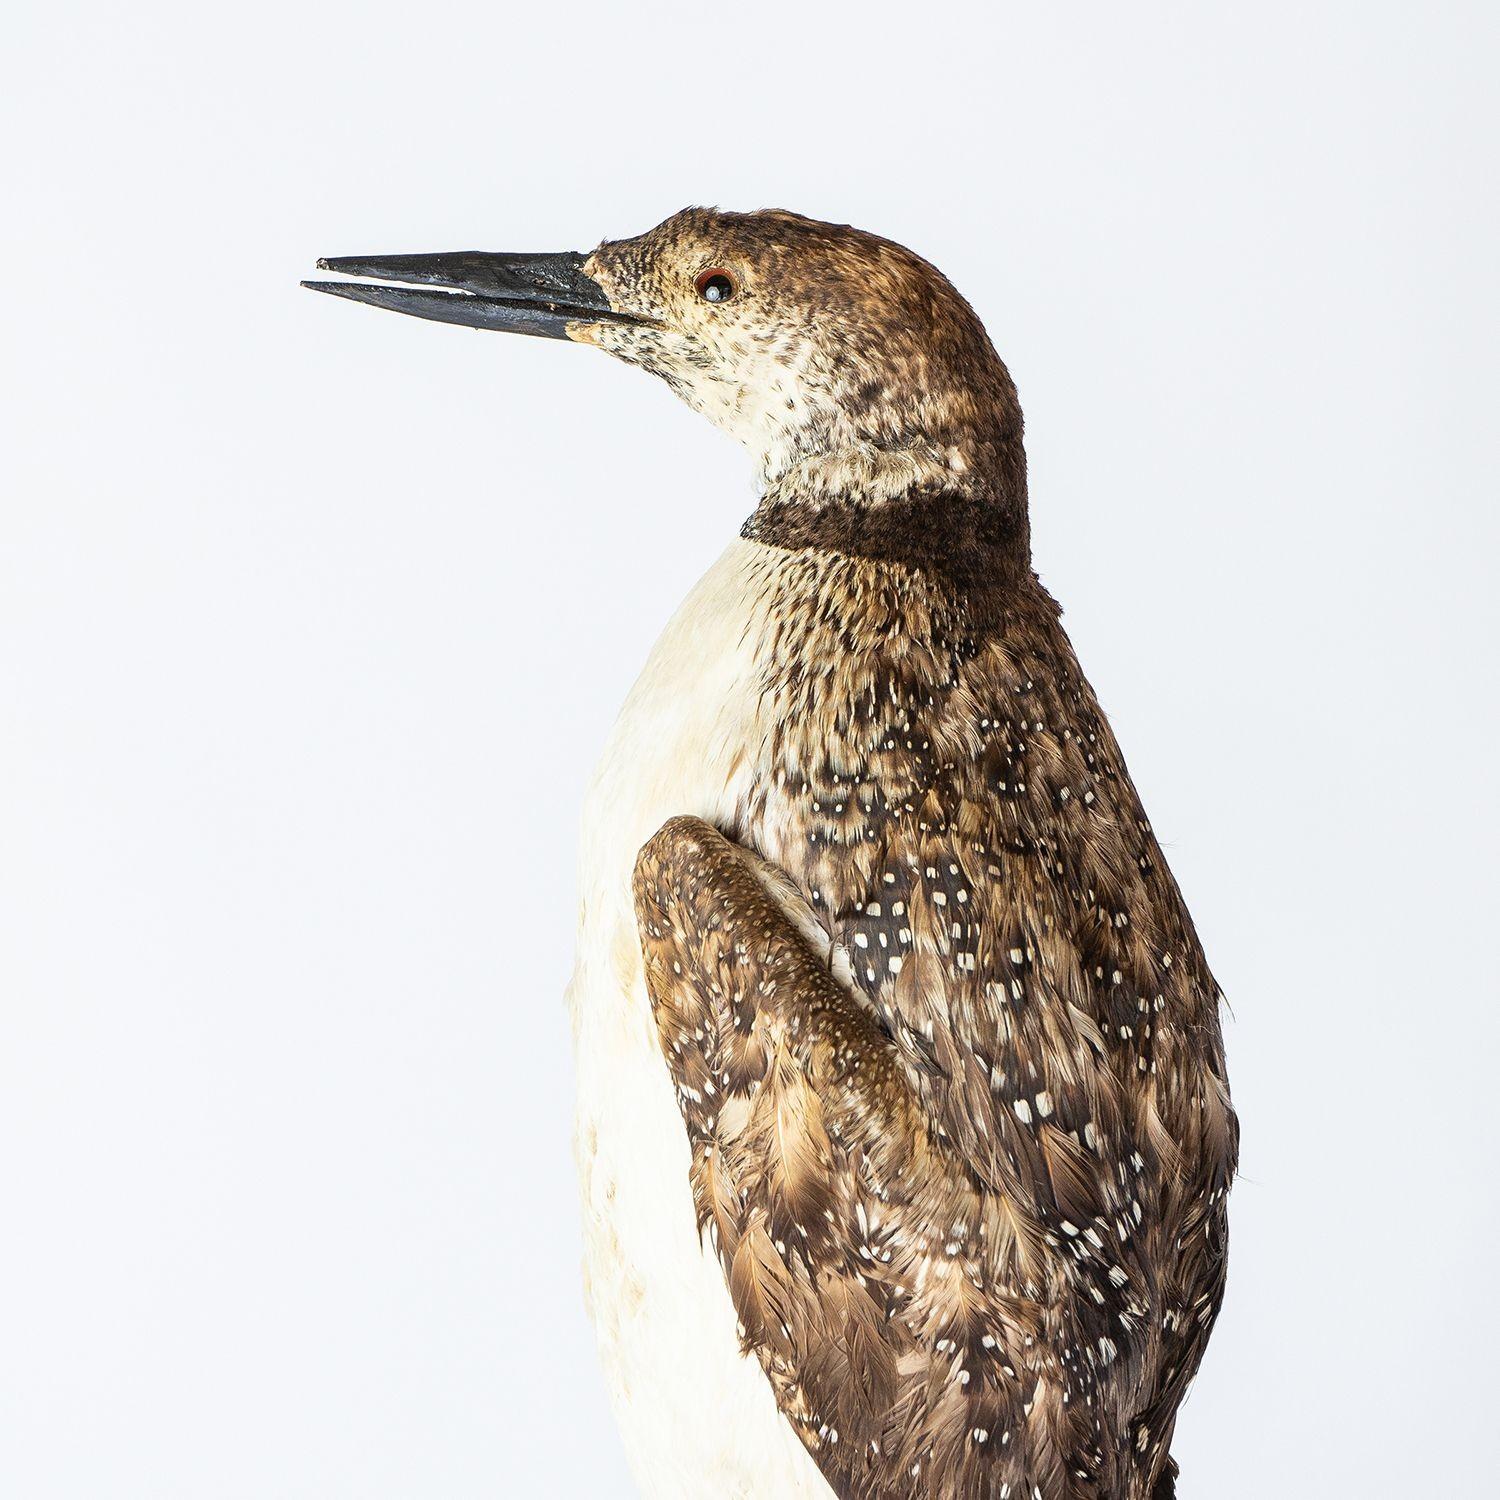 Antique Mounted Taxidermy Loon on Naturalistic Base, Early 20th Century Bird For Sale 3